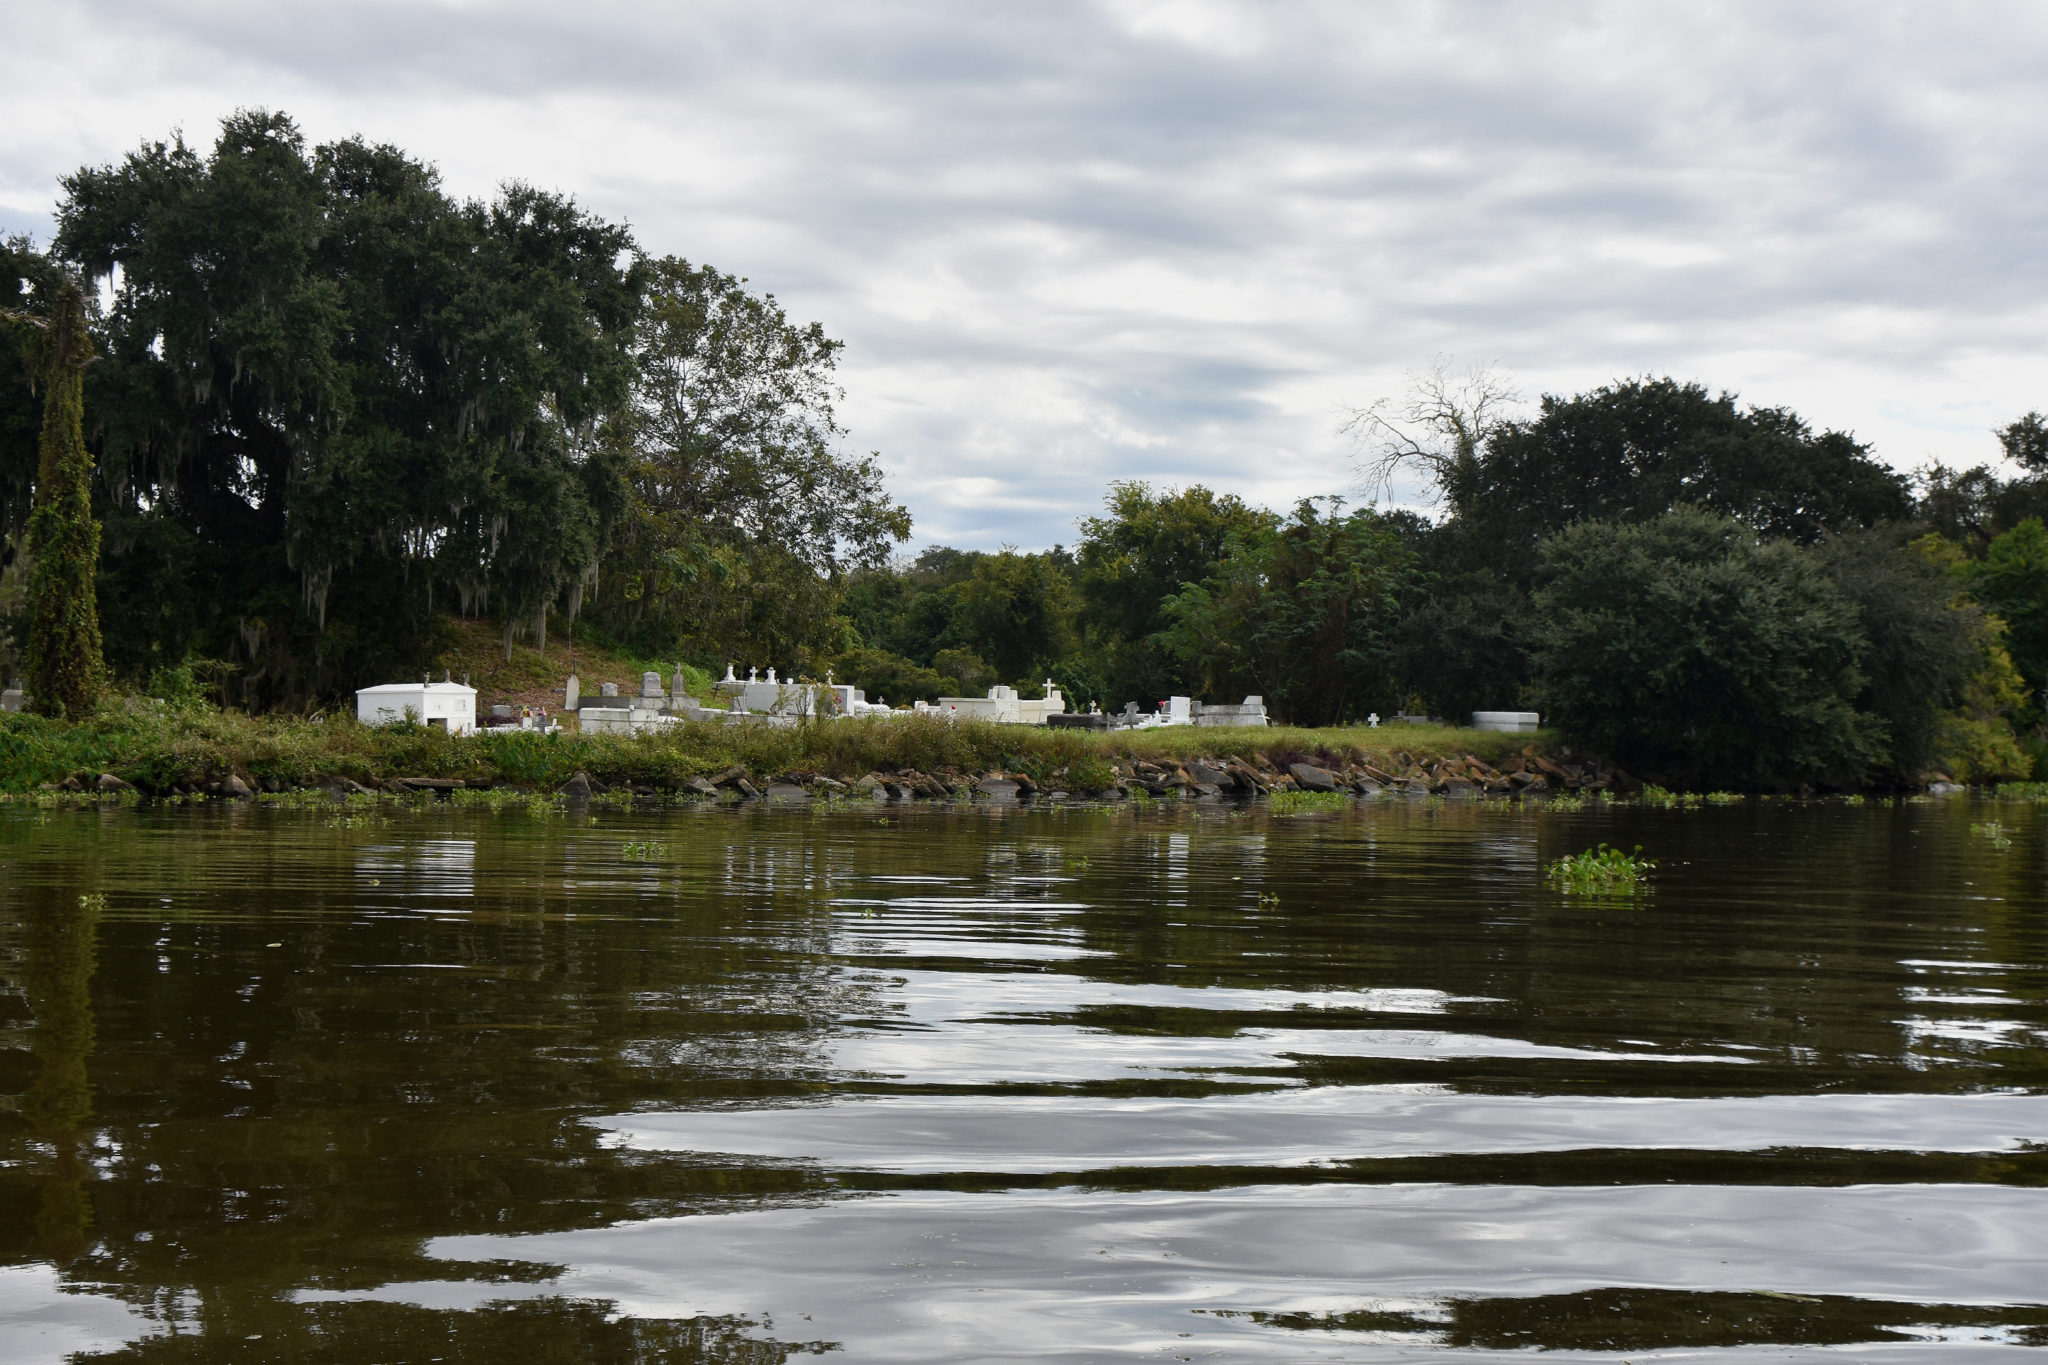 Get your spooky fix on our airboat rides.